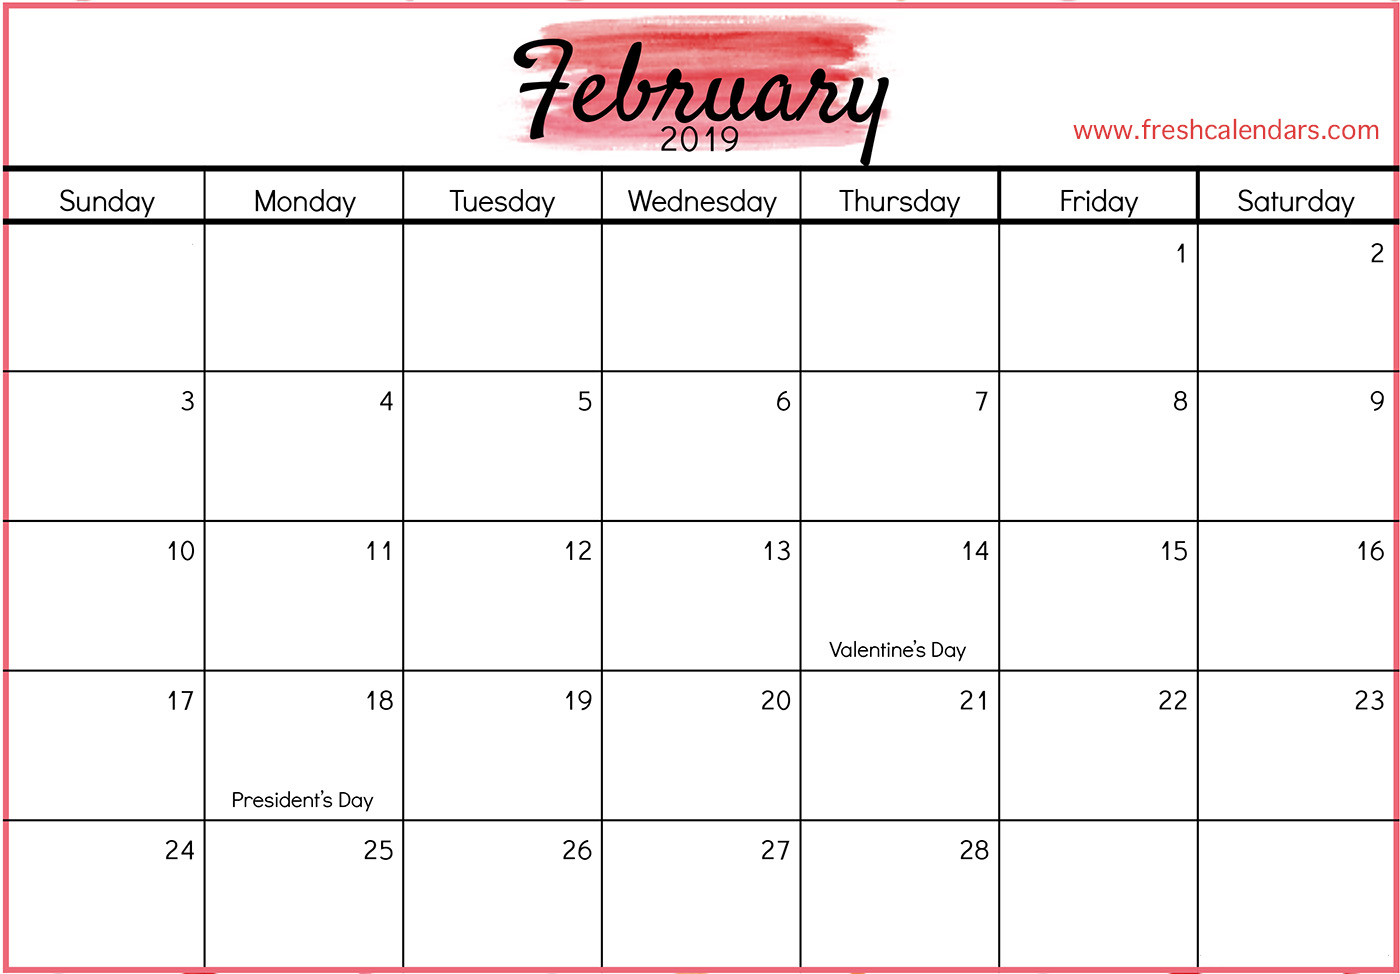 February 2019 Calendar with Holidays (Red)